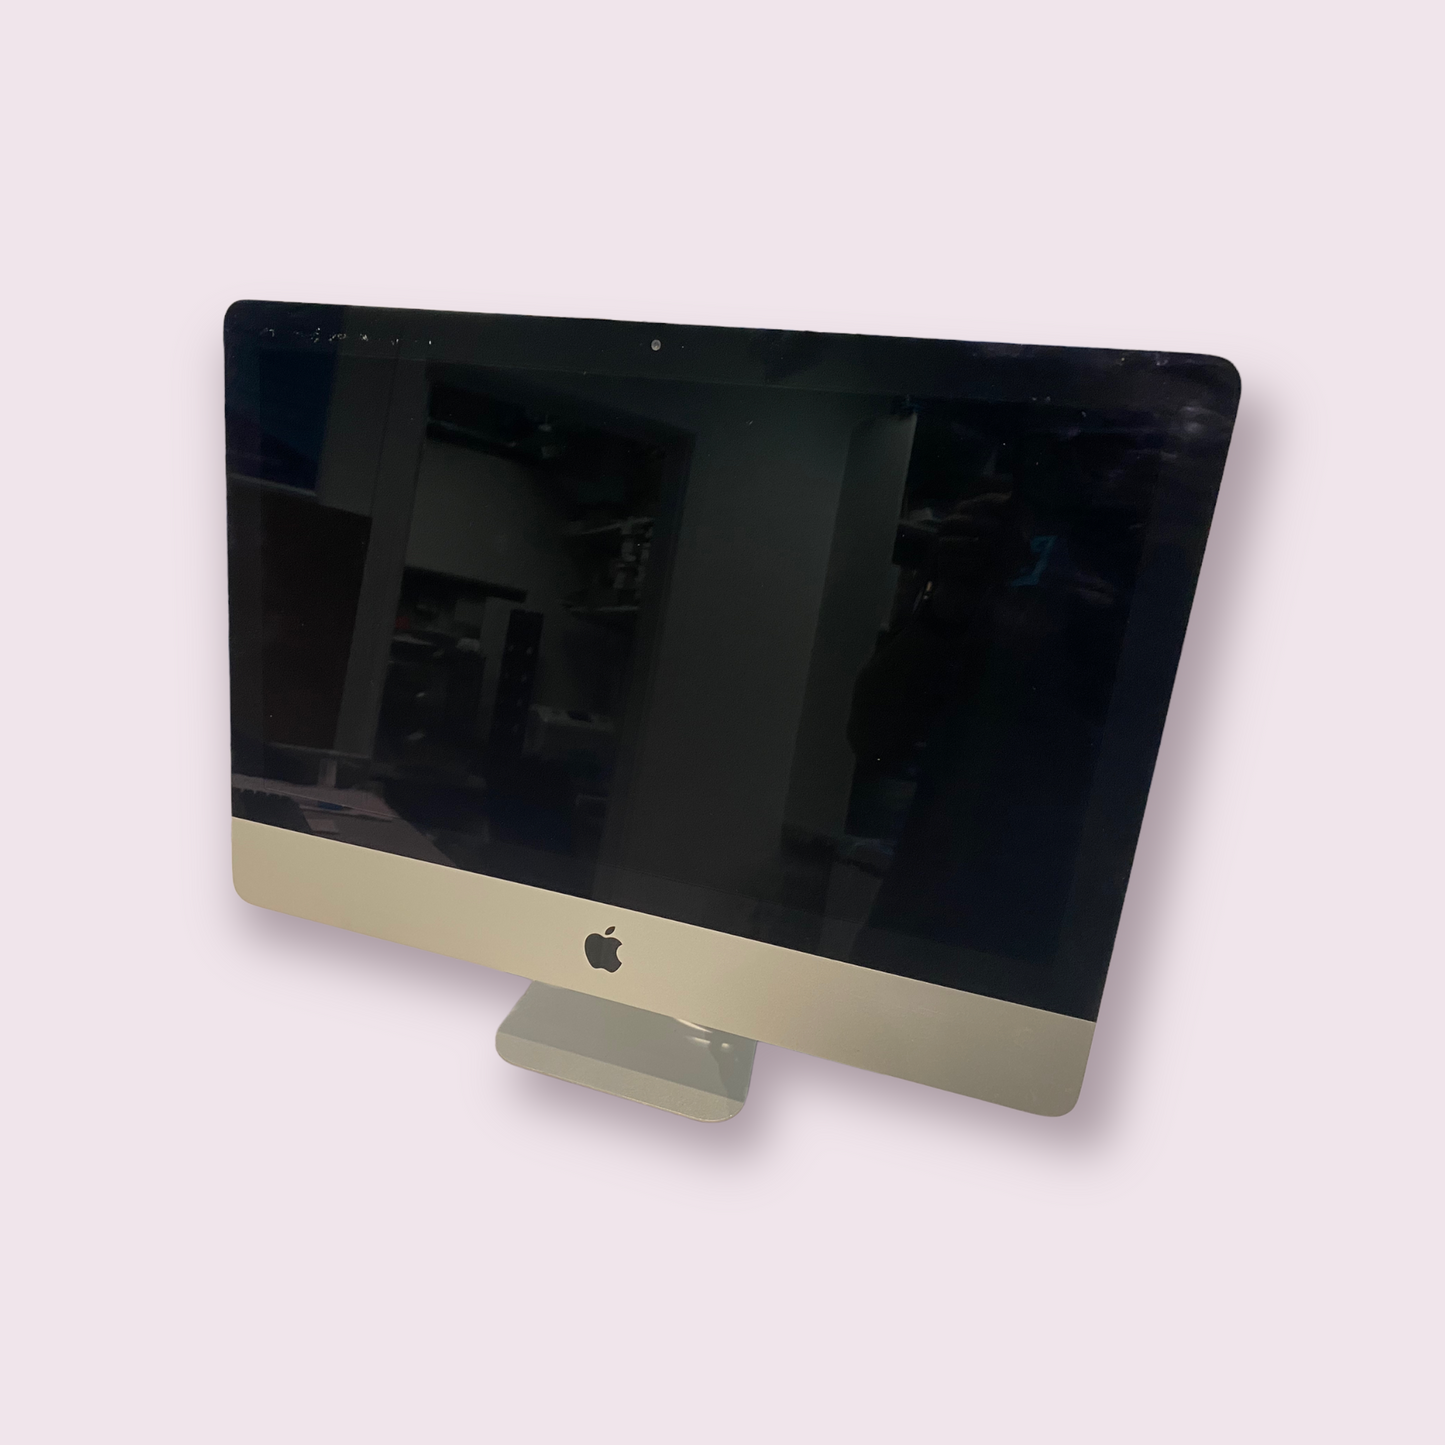 Apple iMac 21.5 Late 2012 i5 @ 2.5GHz 1TB HDD 8GB RAM Mac OS Mojave With Keyboard and Mouse